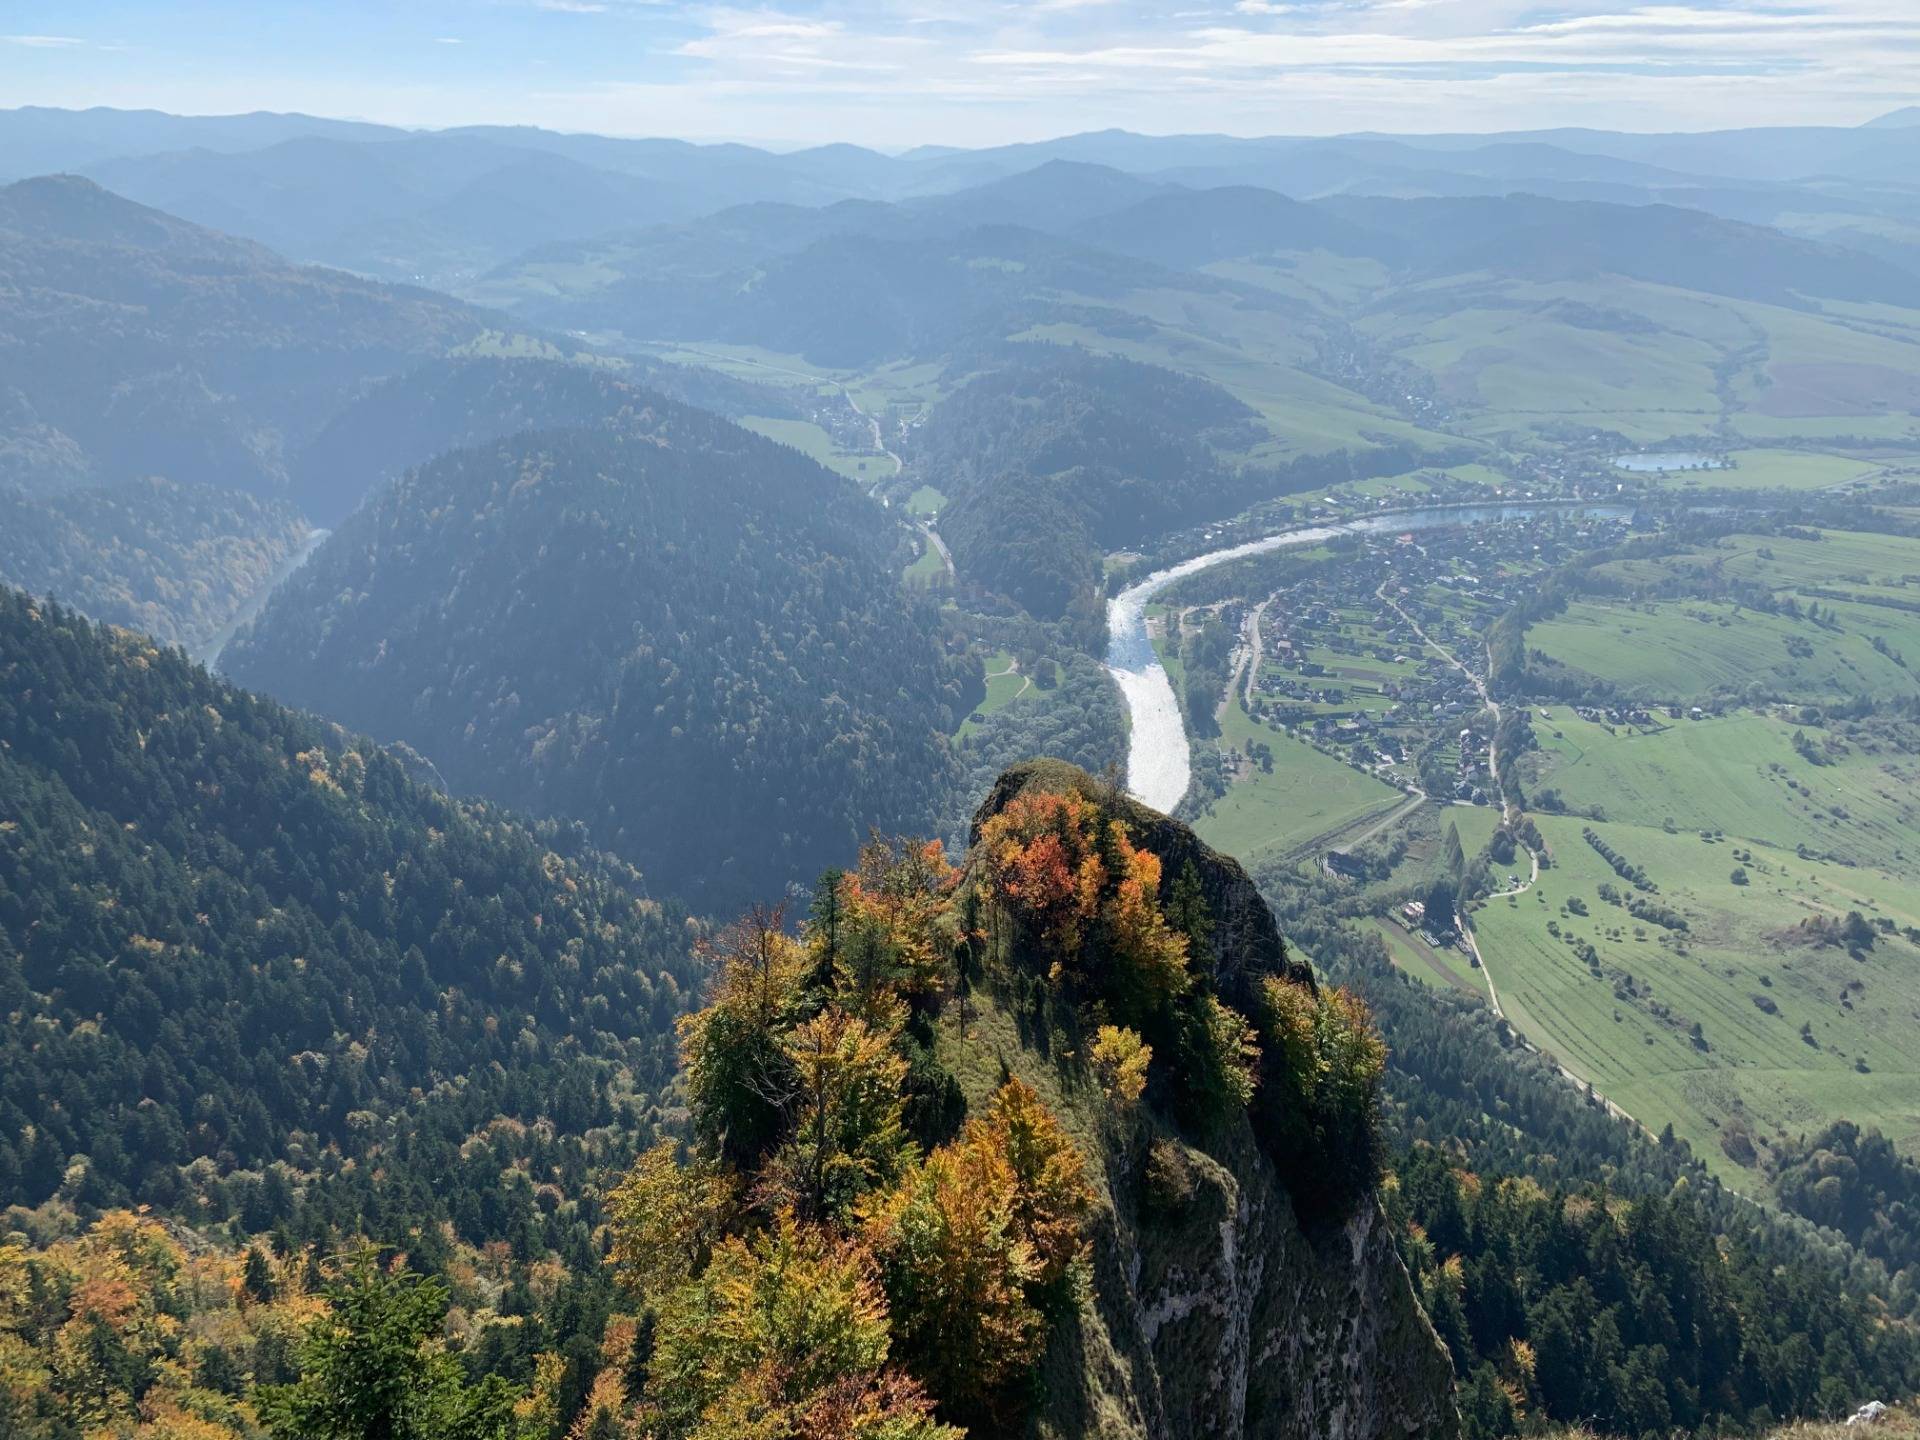 The Dunajec River Gorge seen from Mt. Trzy Korony